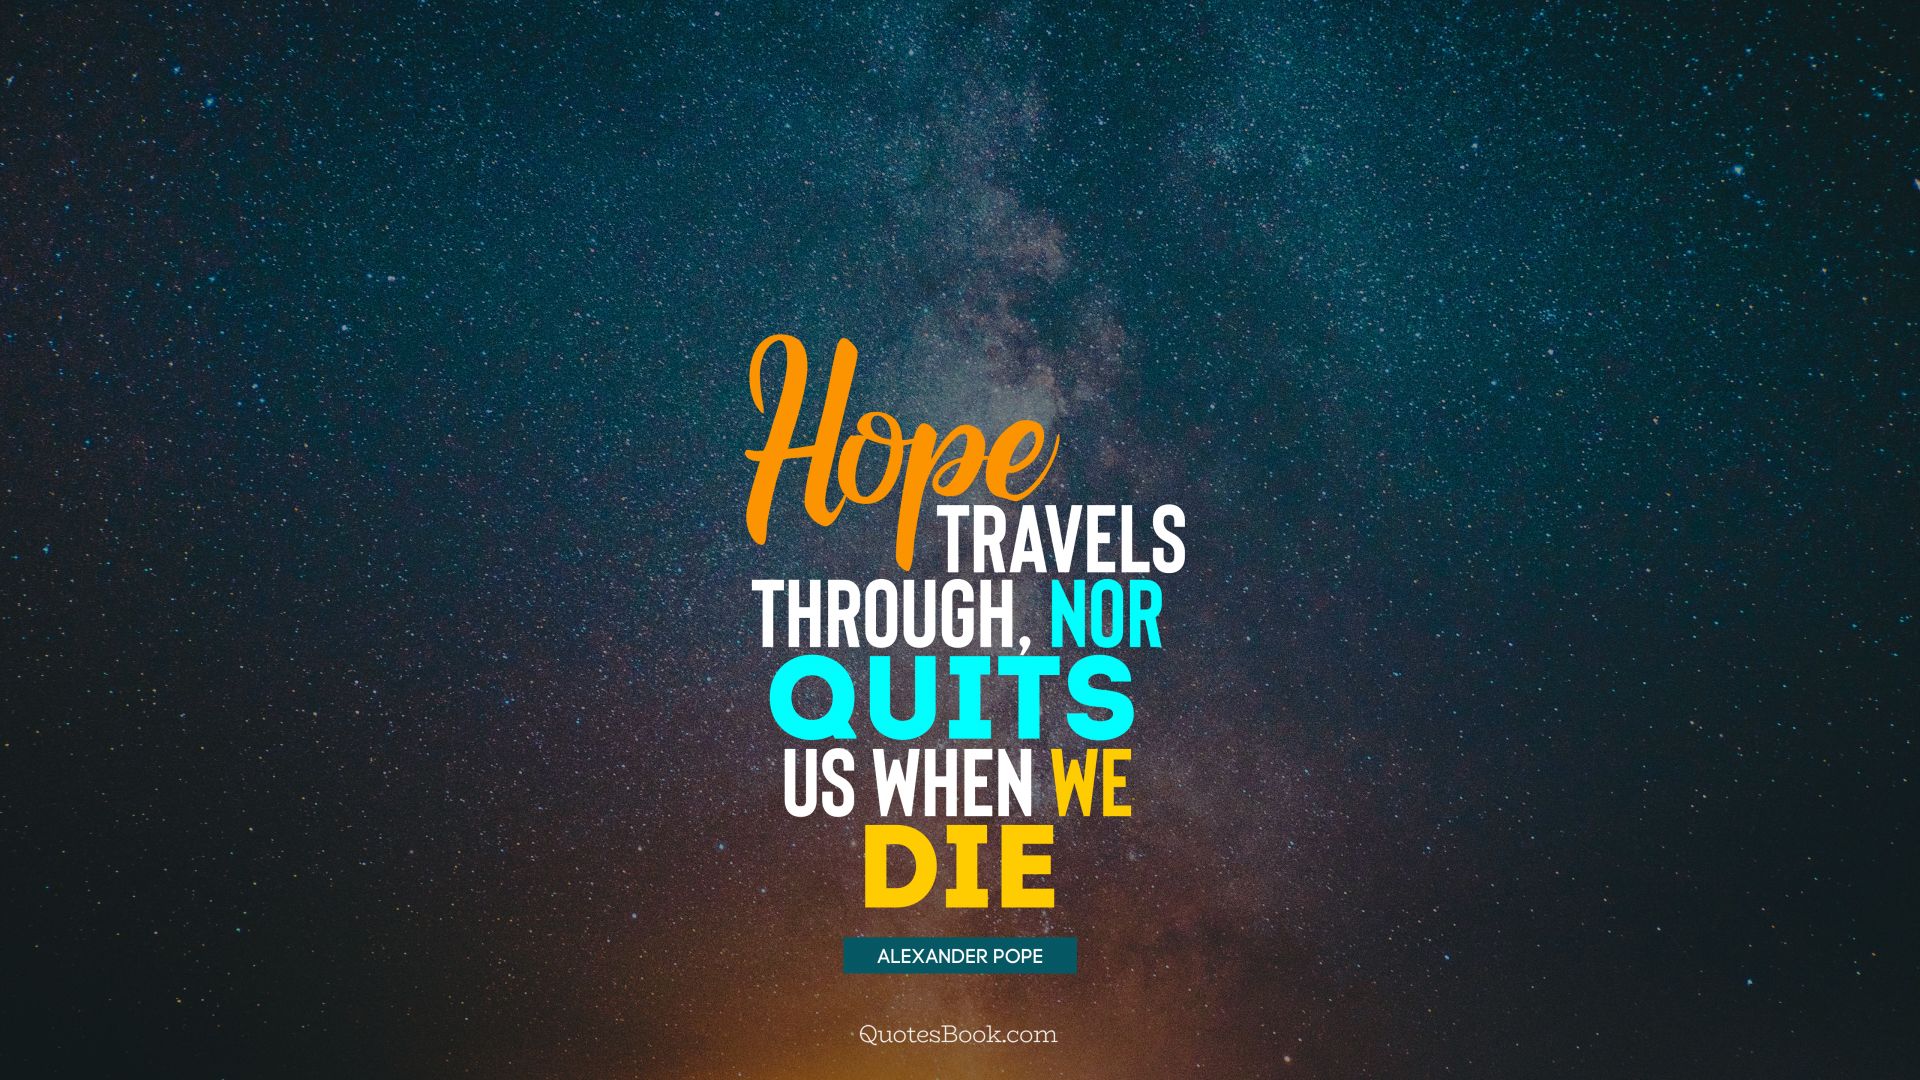 Hope travels through, nor quits us when we die. - Quote by Alexander Pope